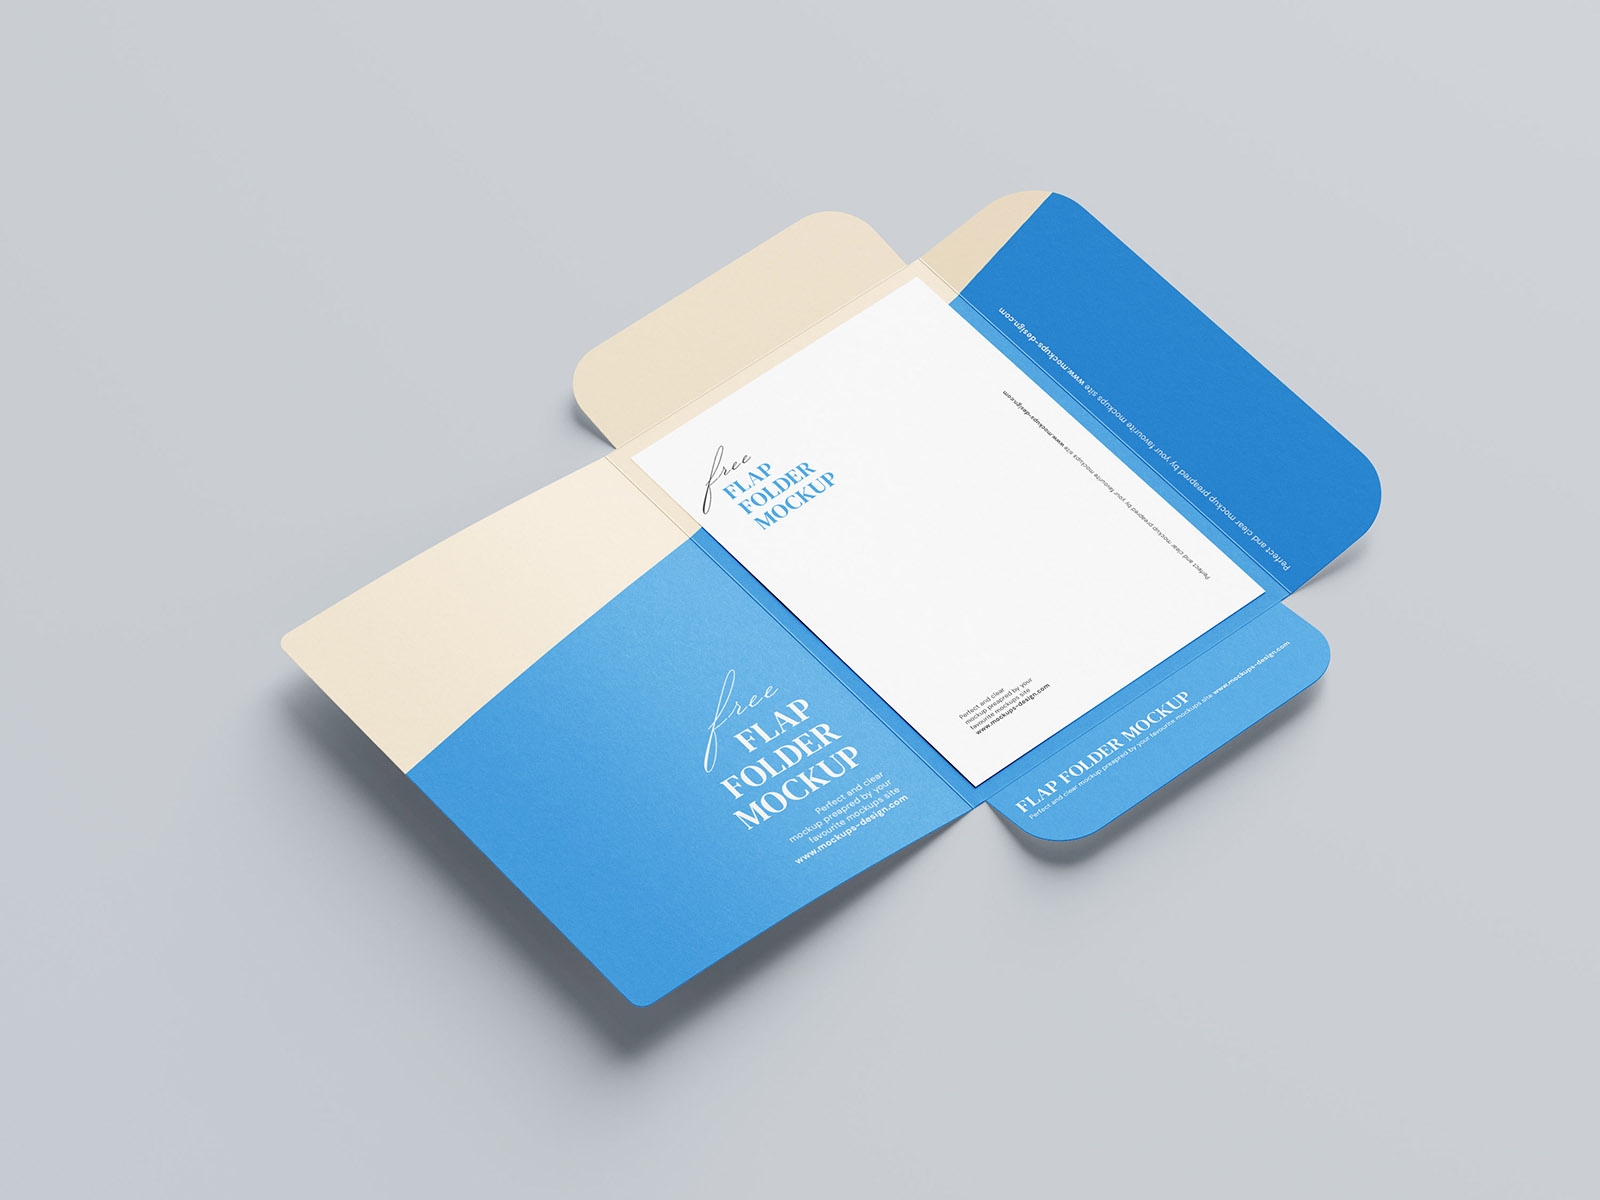 Four Flap Paper Folder Mockup from 4 Different Views FREE PSD